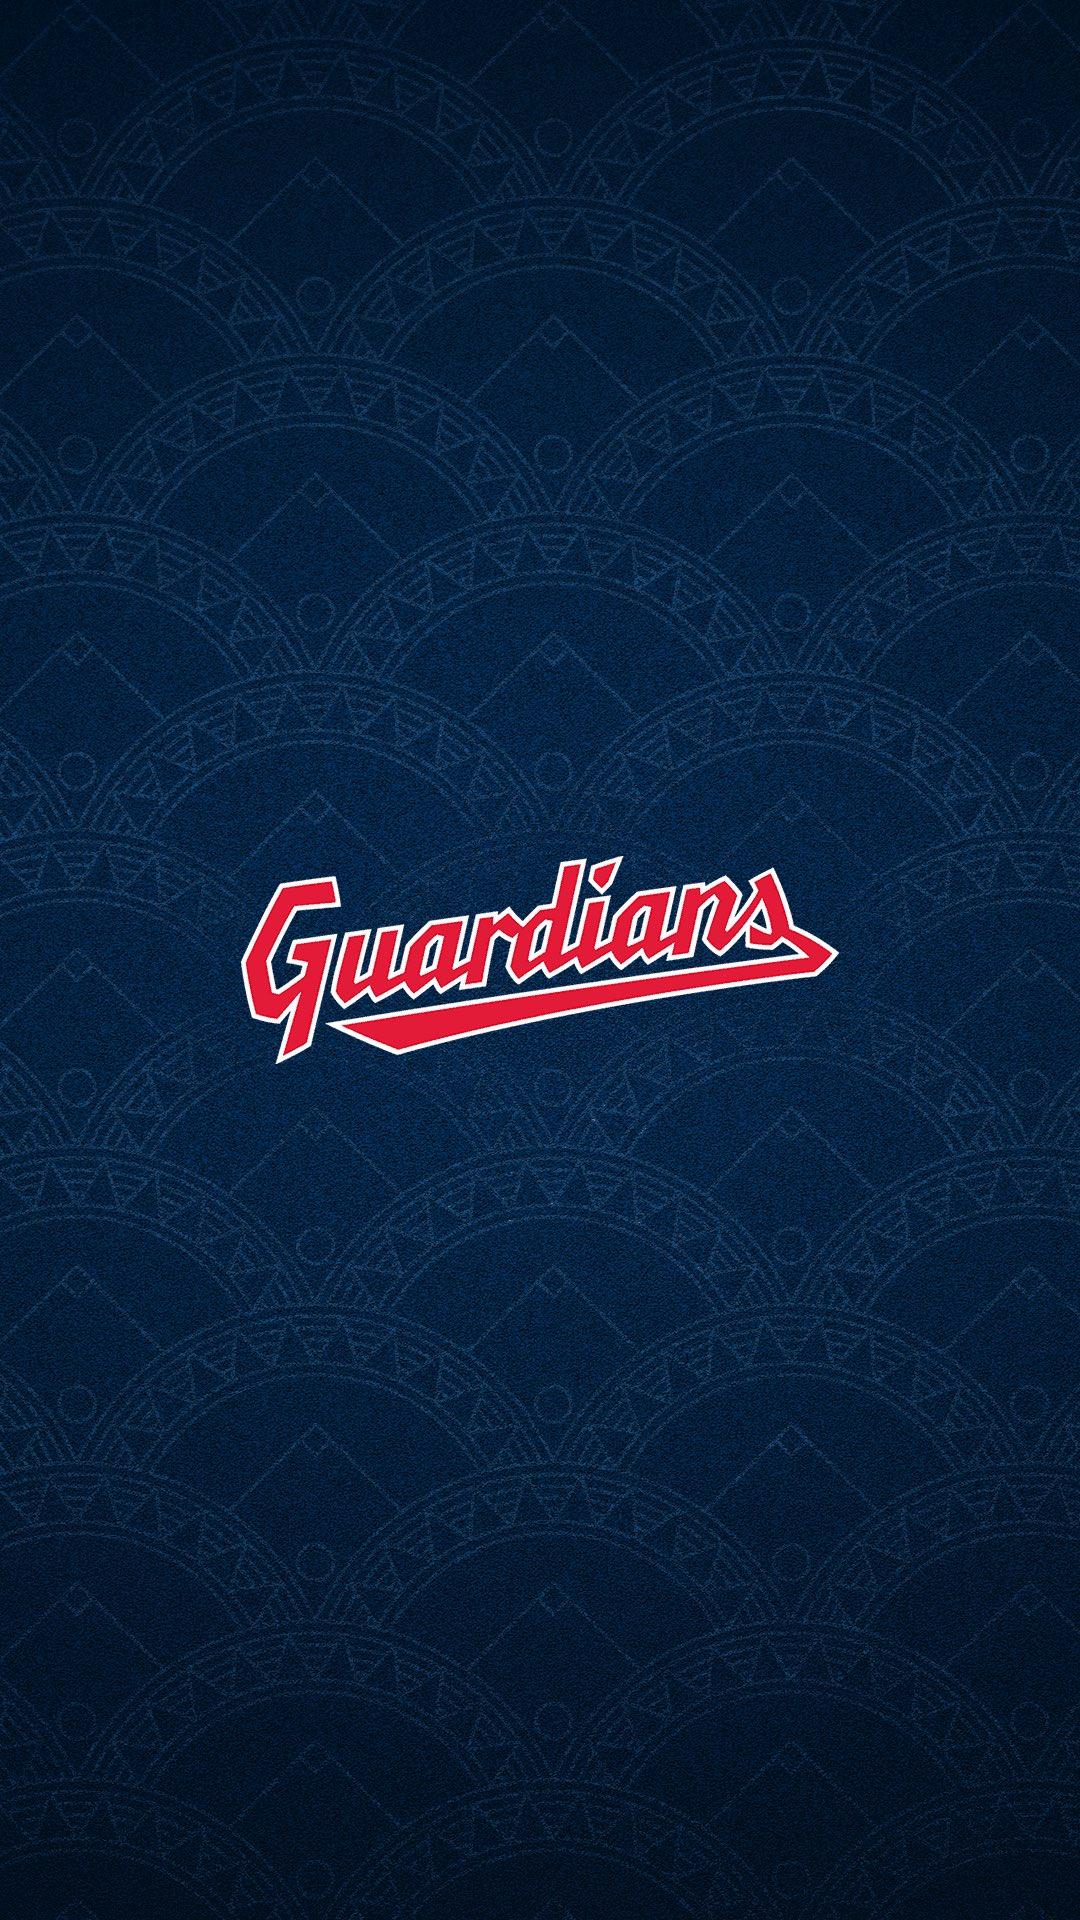 Cleveland Guardians on X: These wallpapers are intended for use on your  mobile devices, but if they fit into the decor of your home, by all means   #TribeSpring